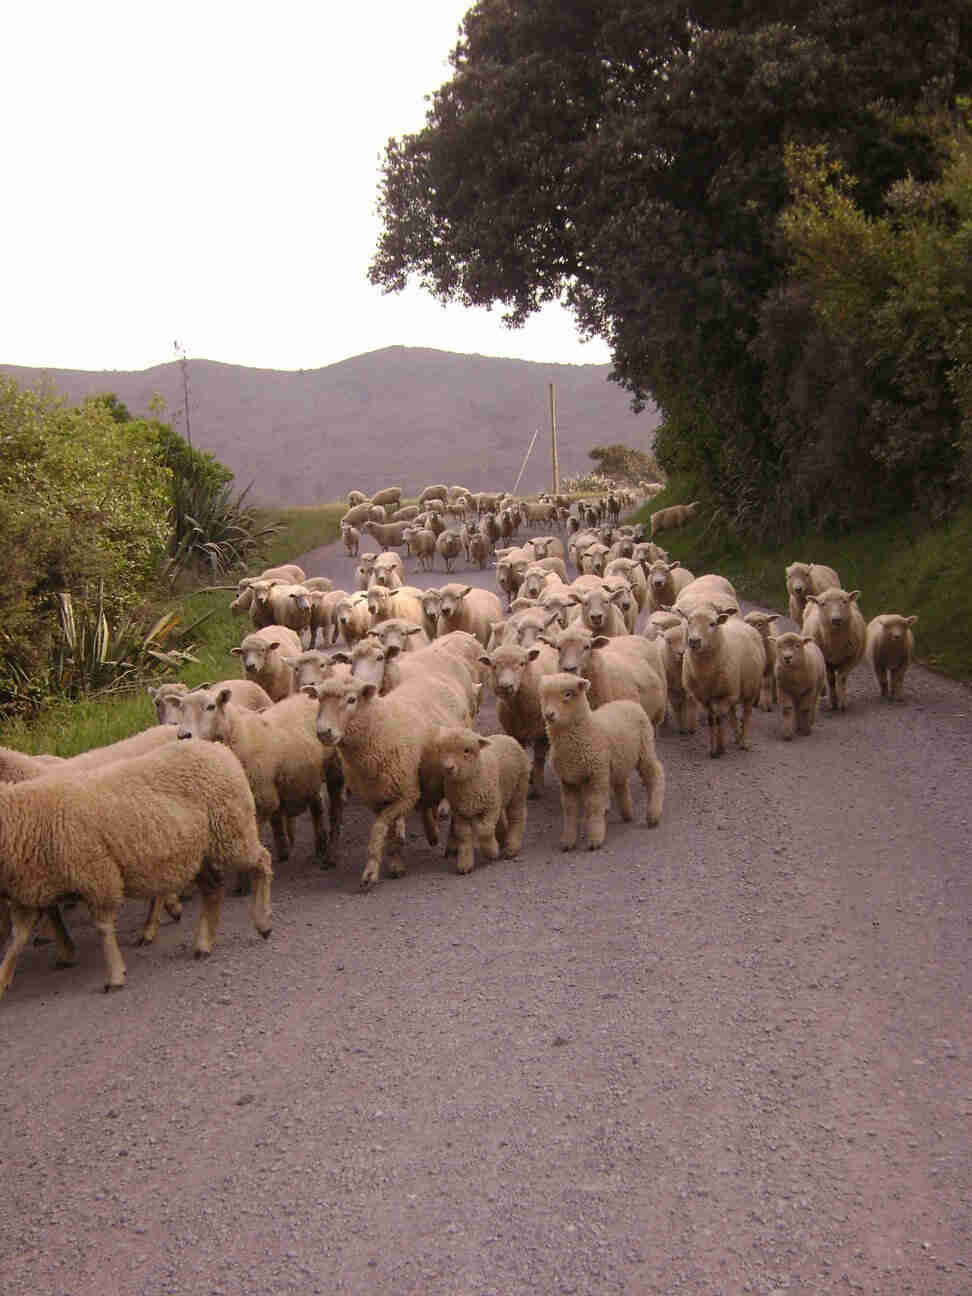 Left side view of sheep crossing a gravel road, with a tree on the right, and mountains in the background